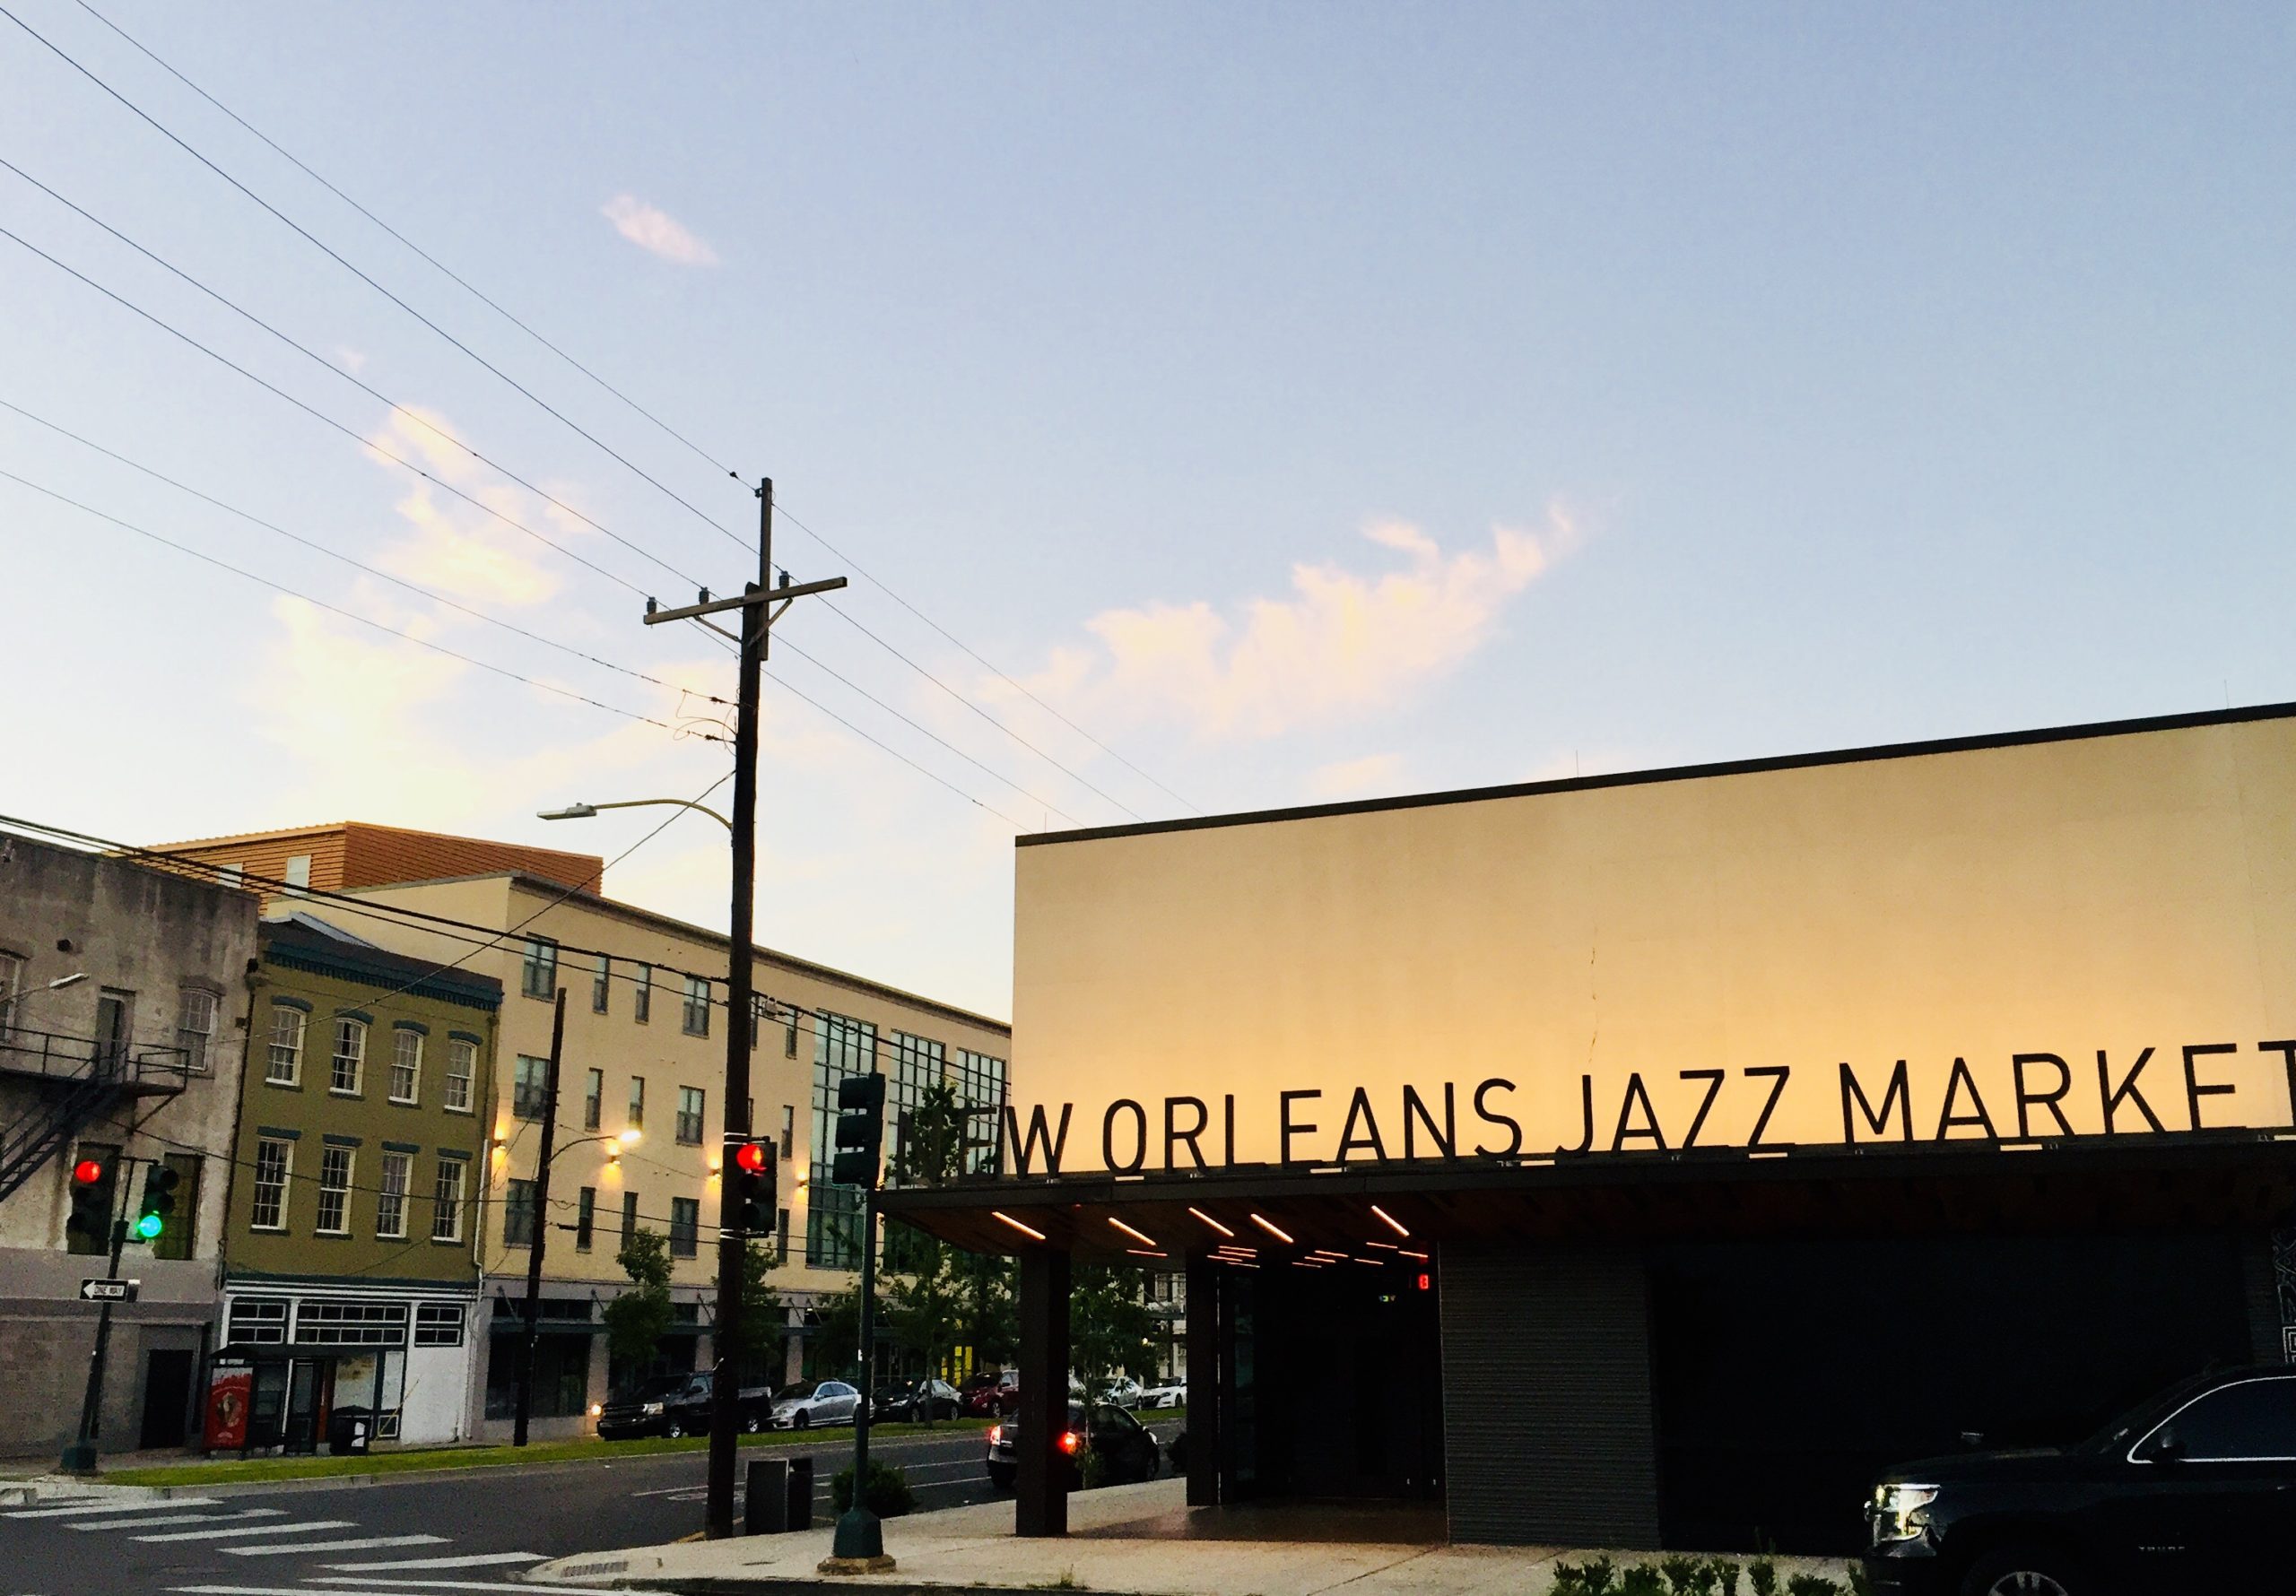 You can check out live music or important seminars and events at the New Orleans Jazz Market.